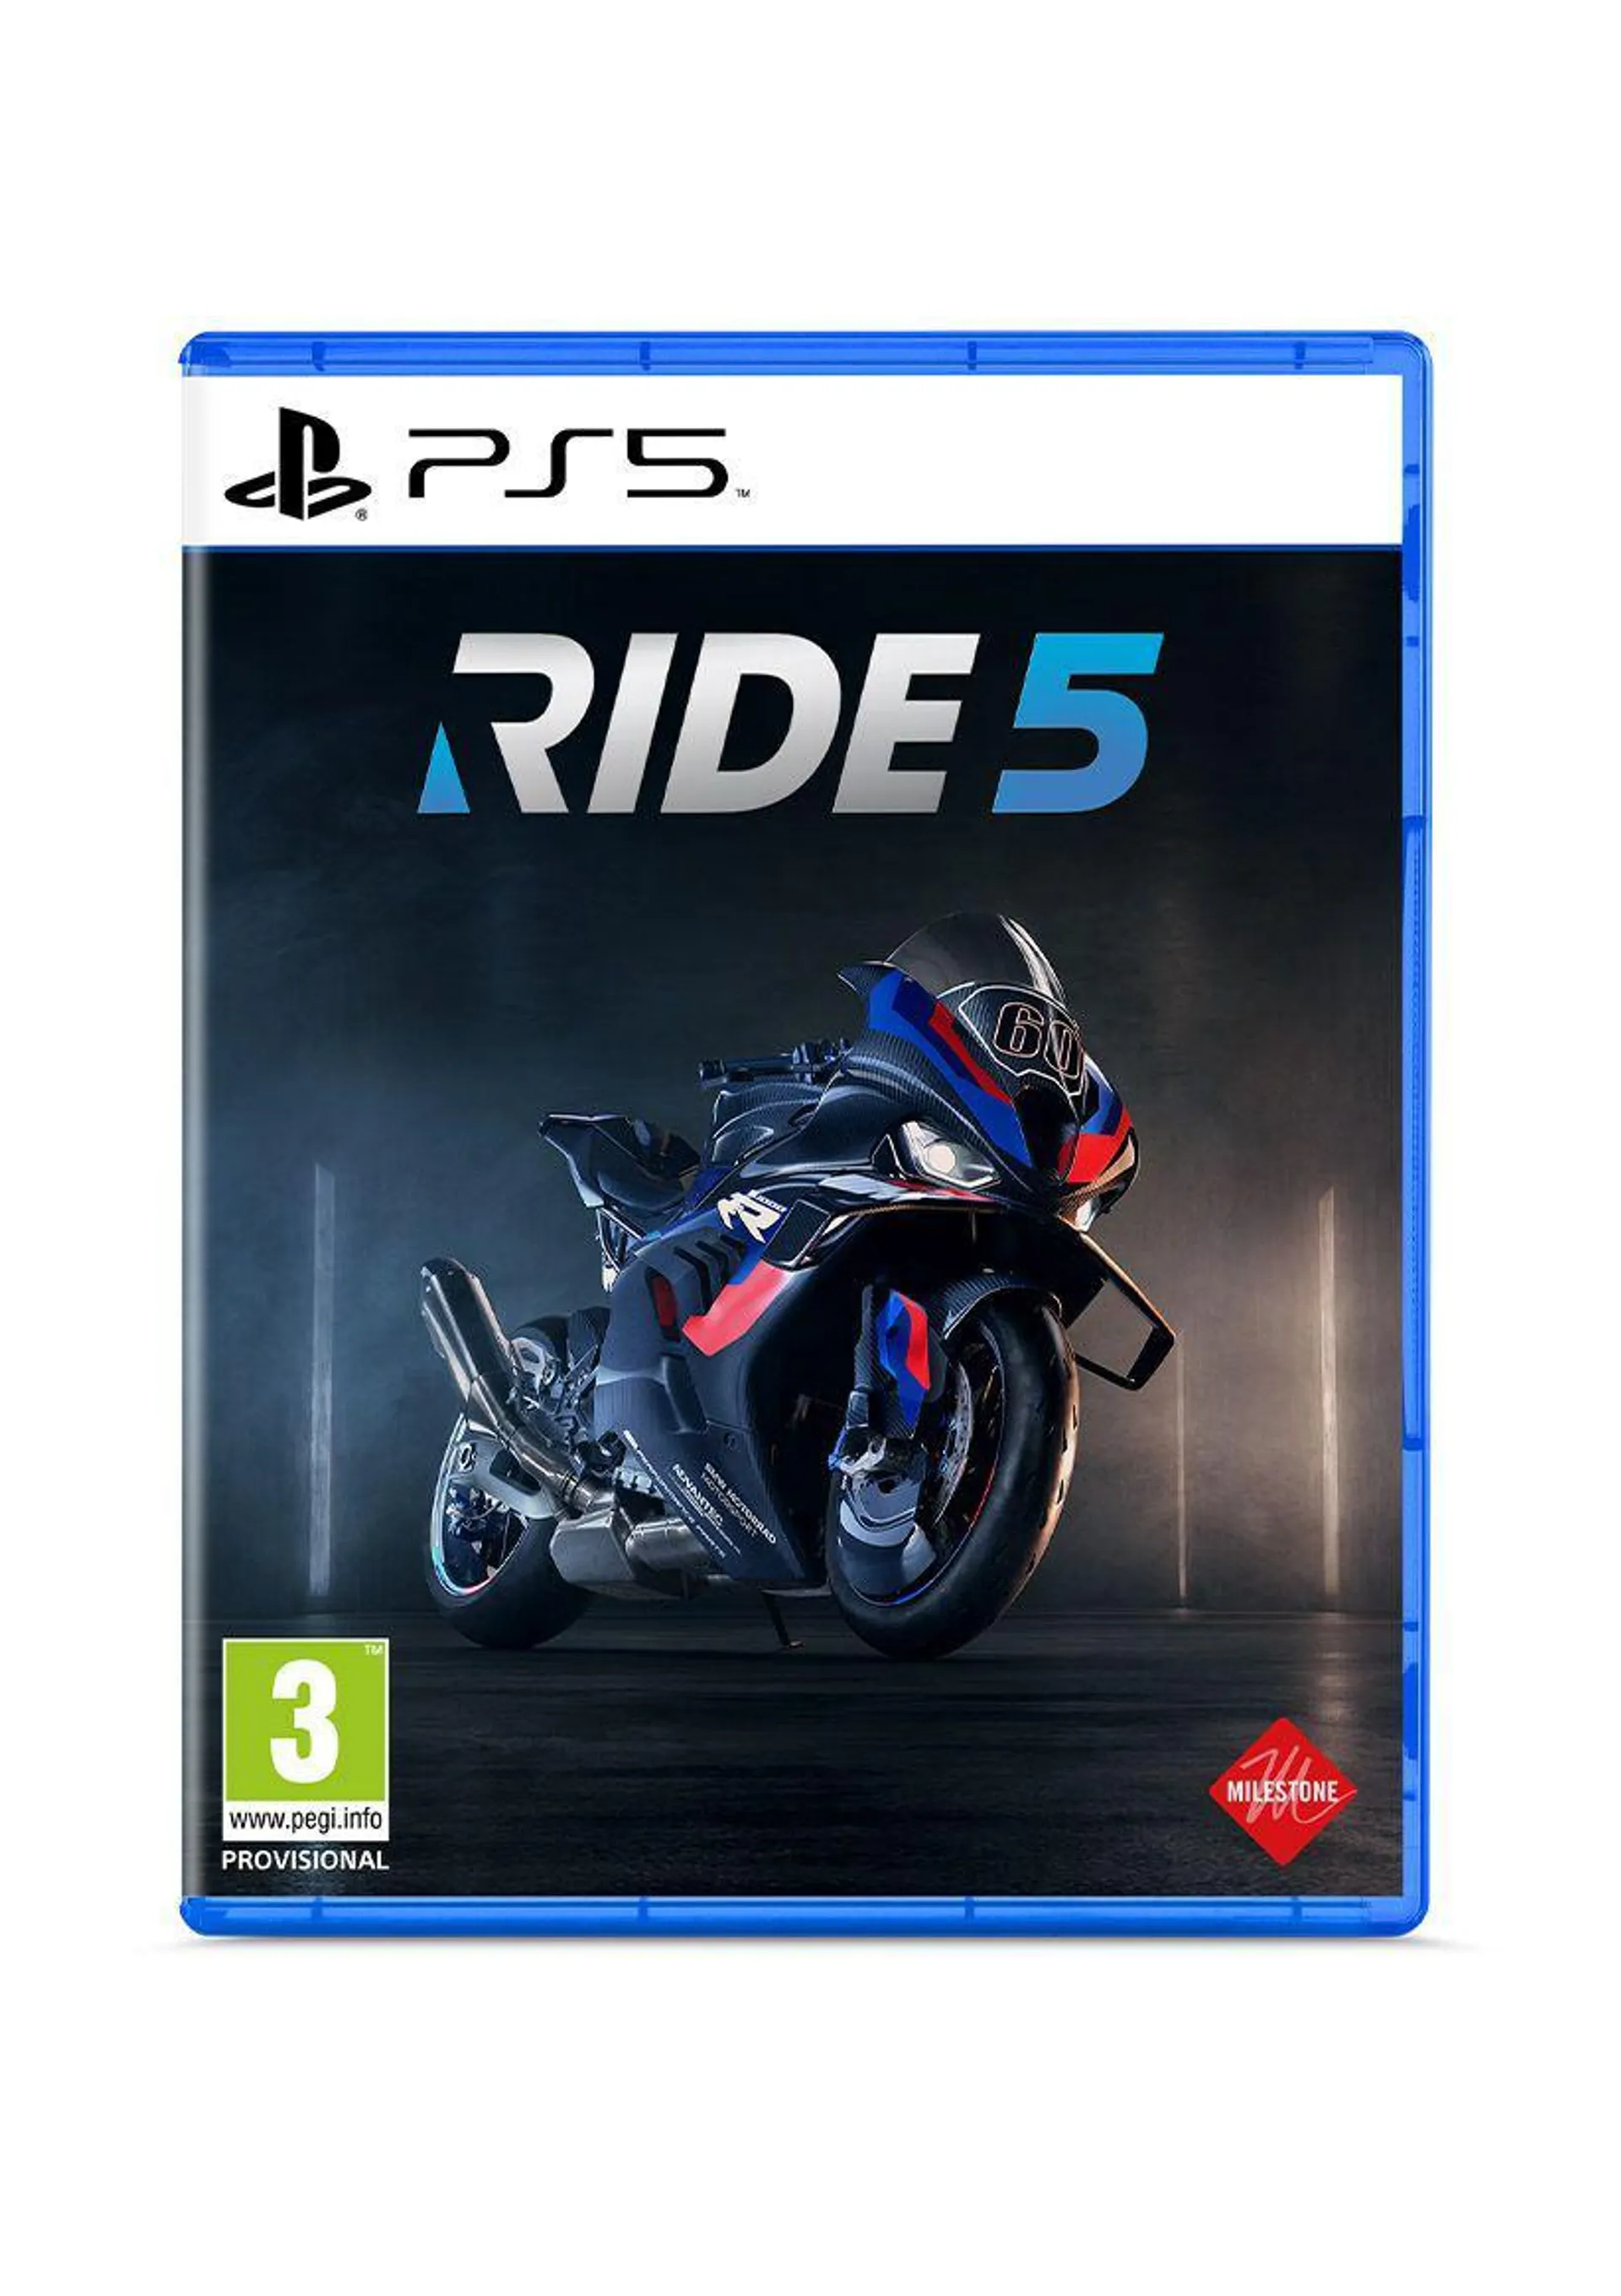 RIDE5 on PlayStation 5